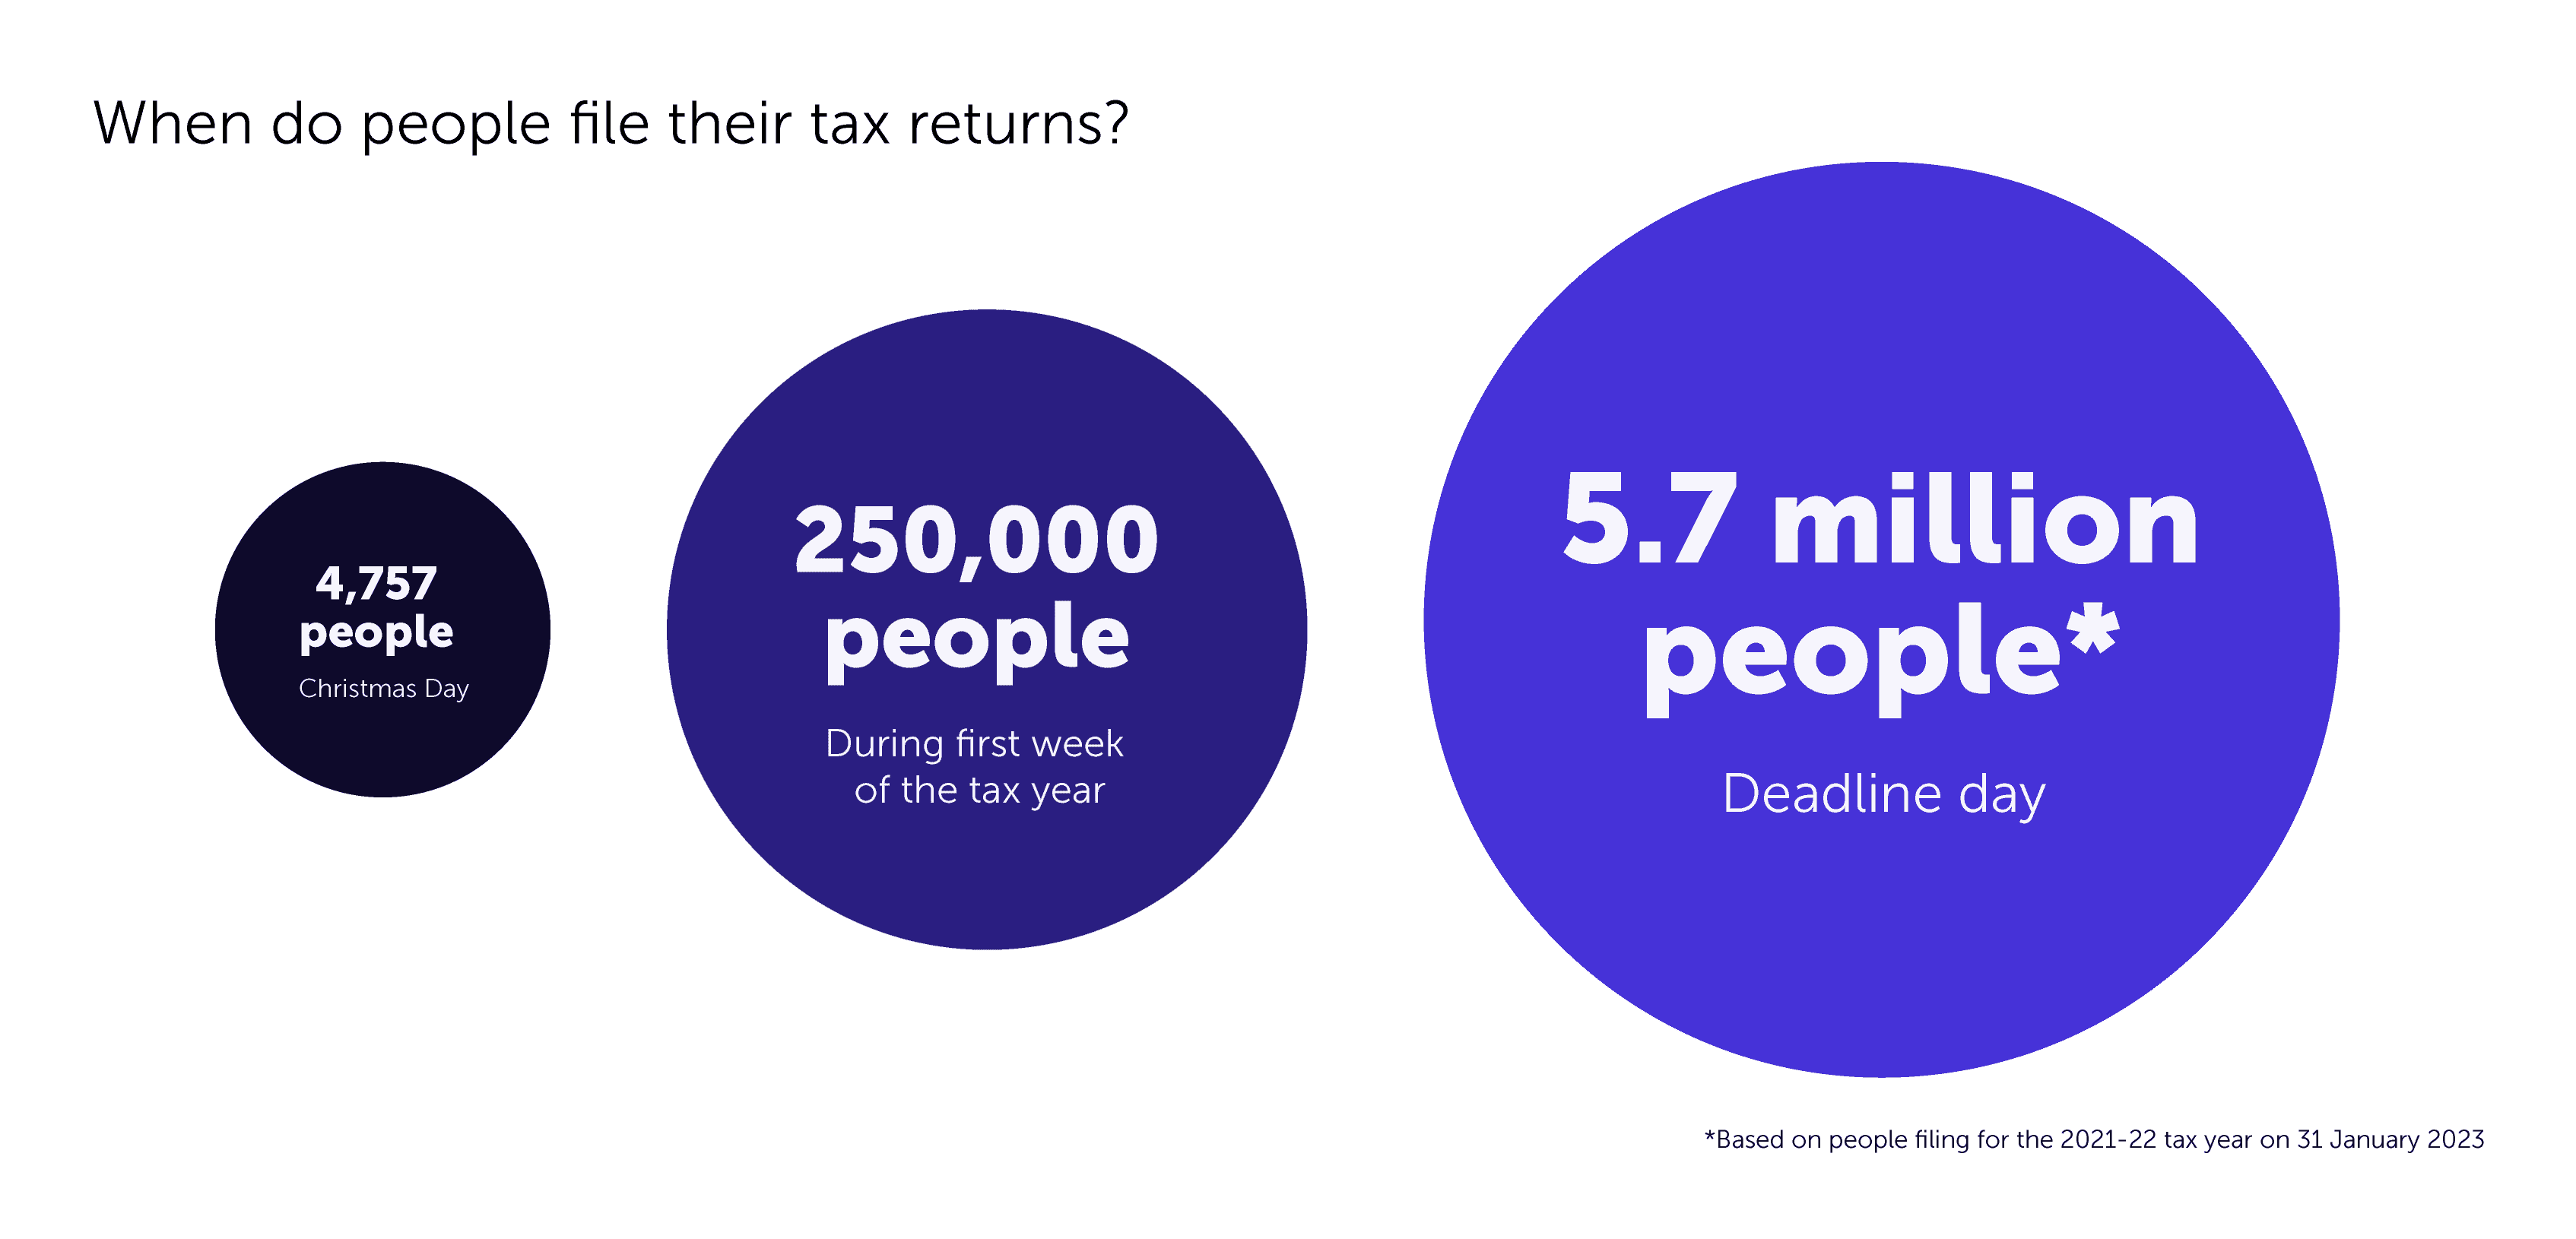 When do people file their tax returns?